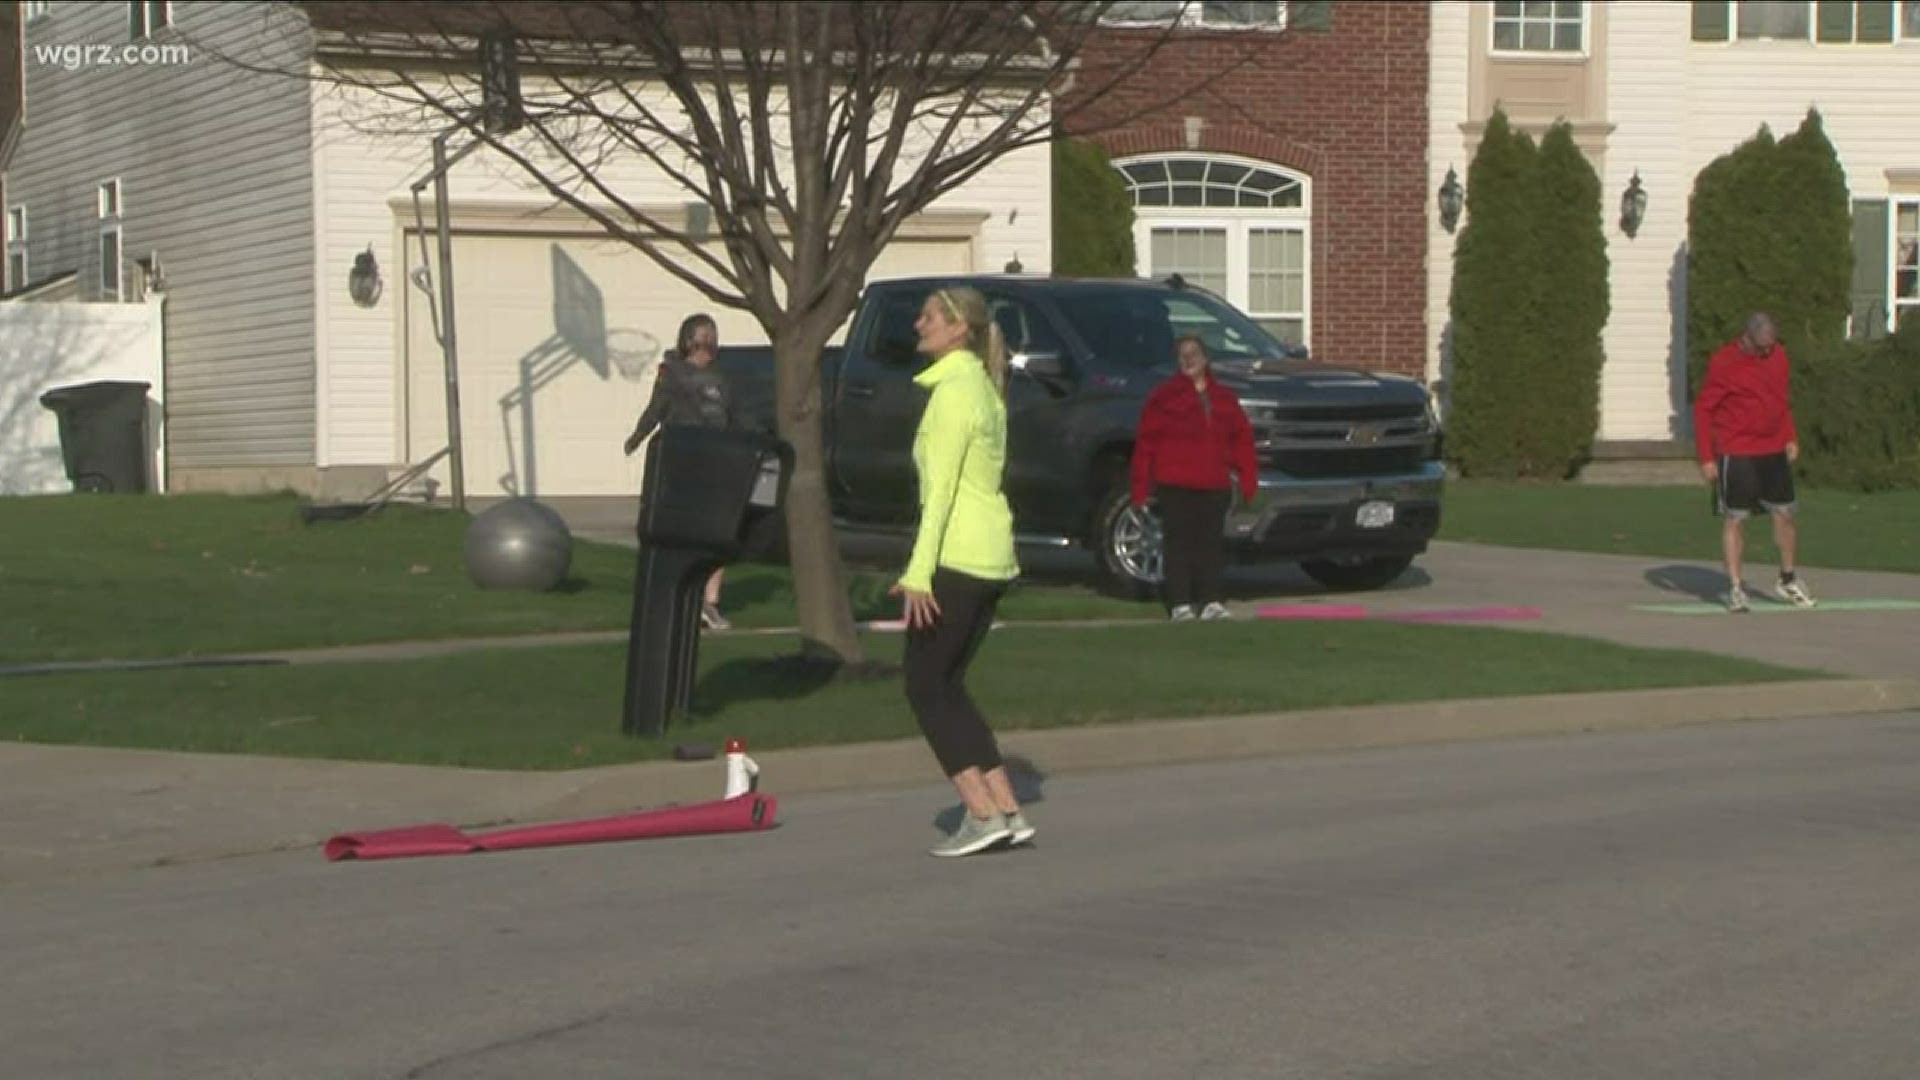 Neighbors gather in Lancaster for an outdoor fitness class